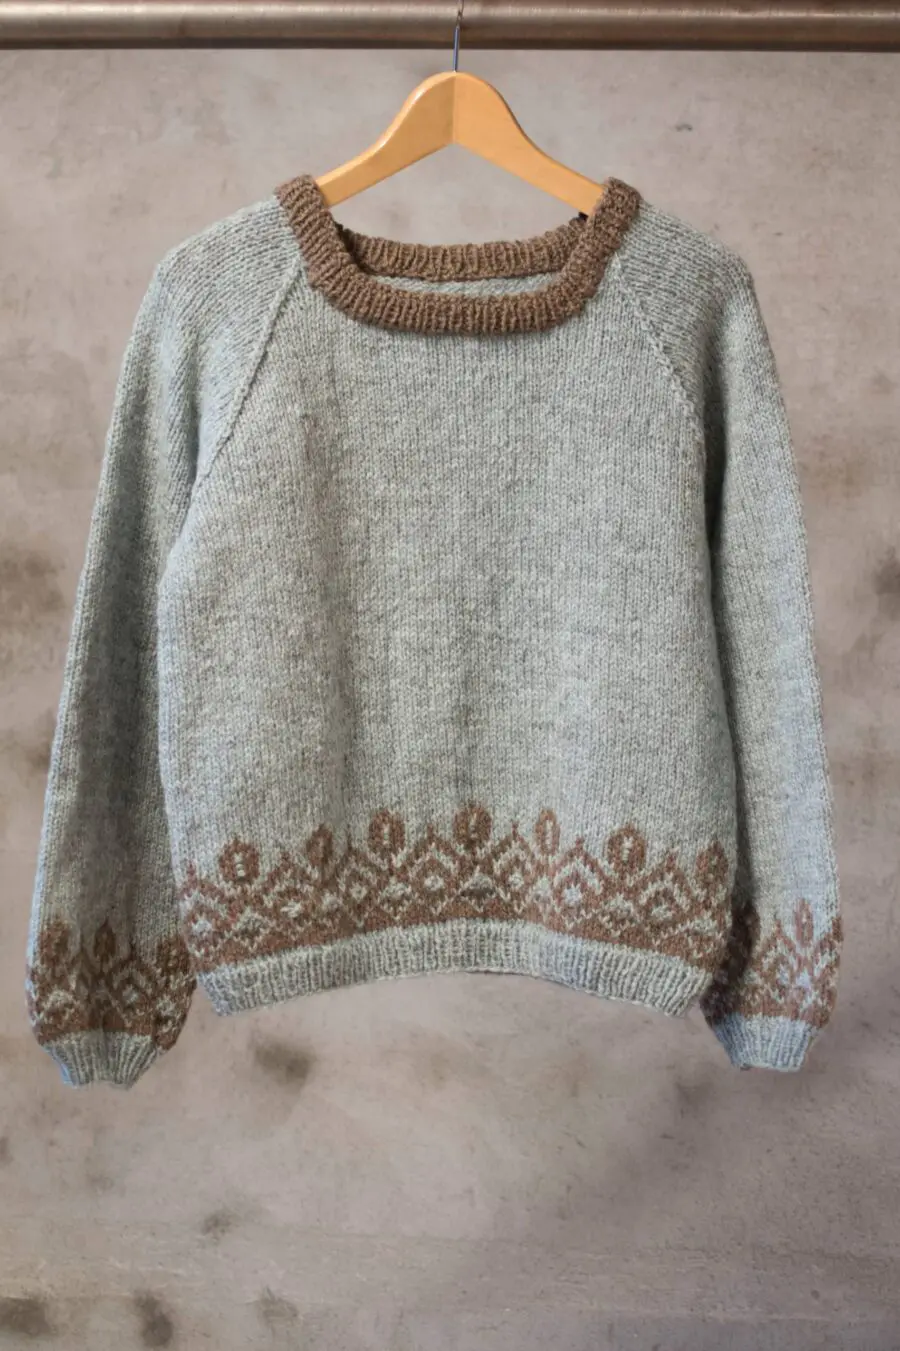 Stølsbu sweater knitted in Varde. Soft and lovely sweater